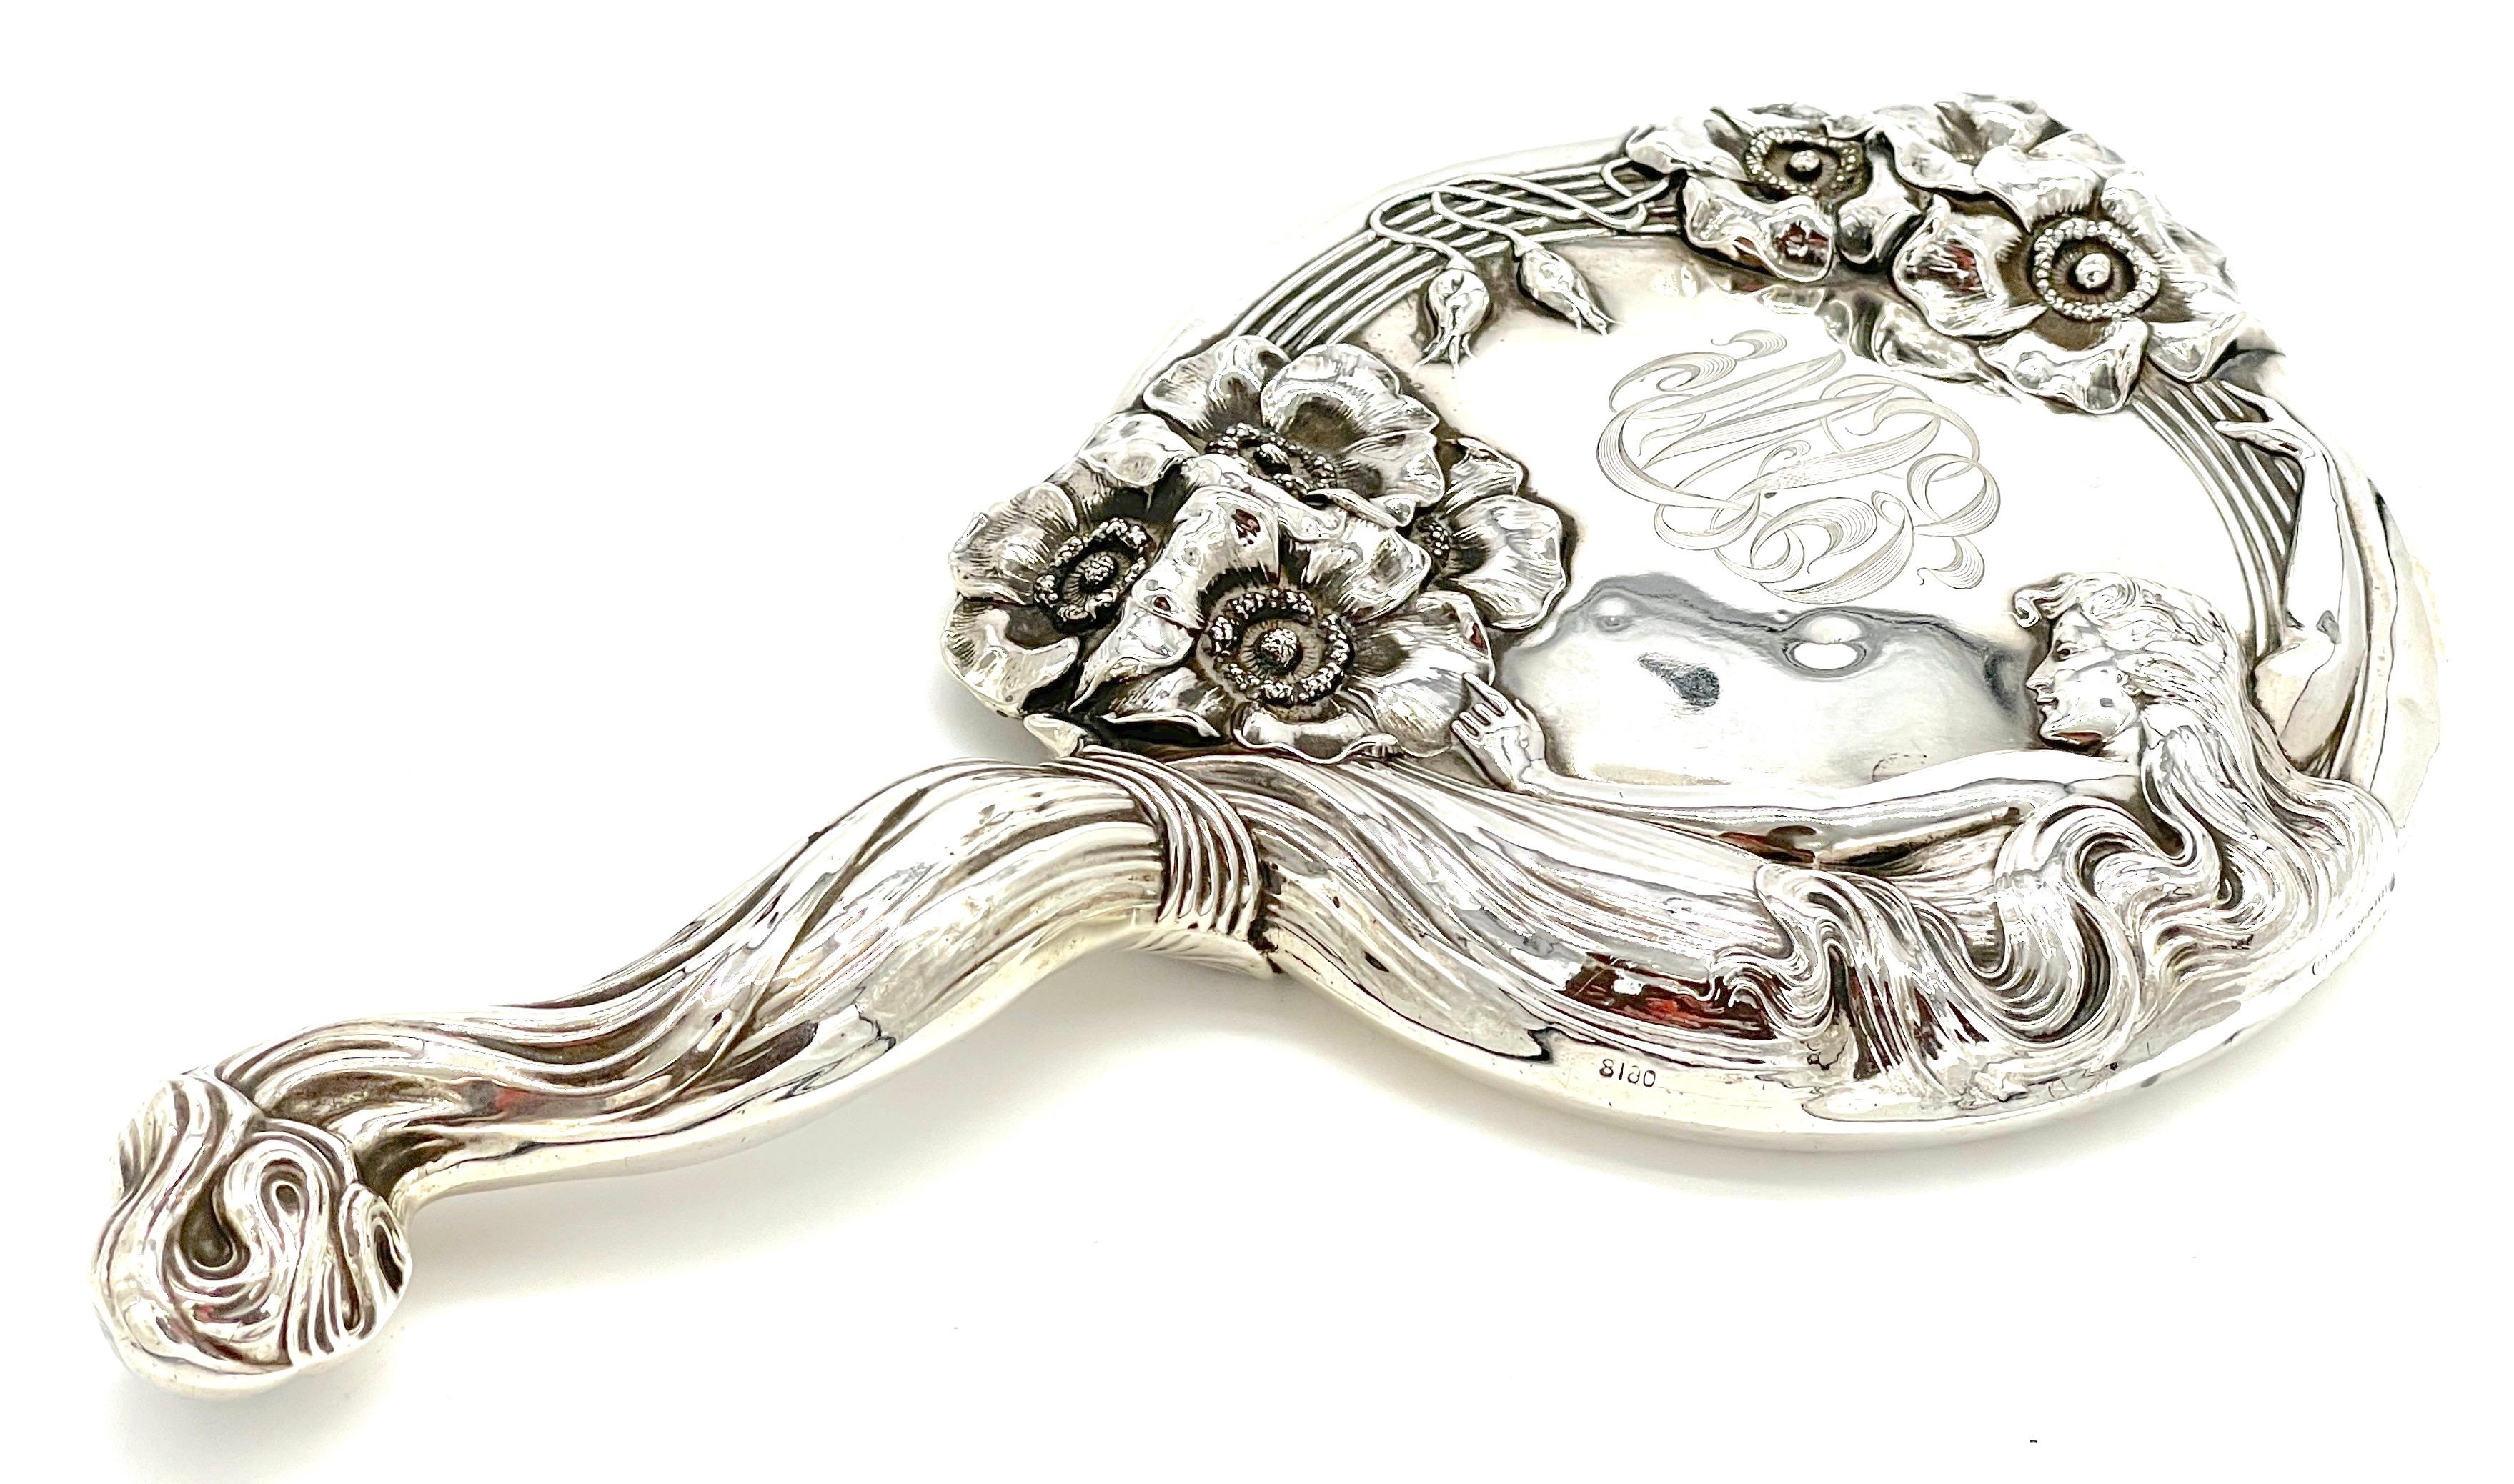 Unger Brothers Art Nouveau Sterling Hand Mirror 'Reine des Fleurs',  (Queen of the Flowers ) C. 1903
USA, Extensively marked for sterling  with the Unger Bros. hallmark (twice) and 925 fine. Pat June 30, 1903 and # 0618

An extraordinary piece of